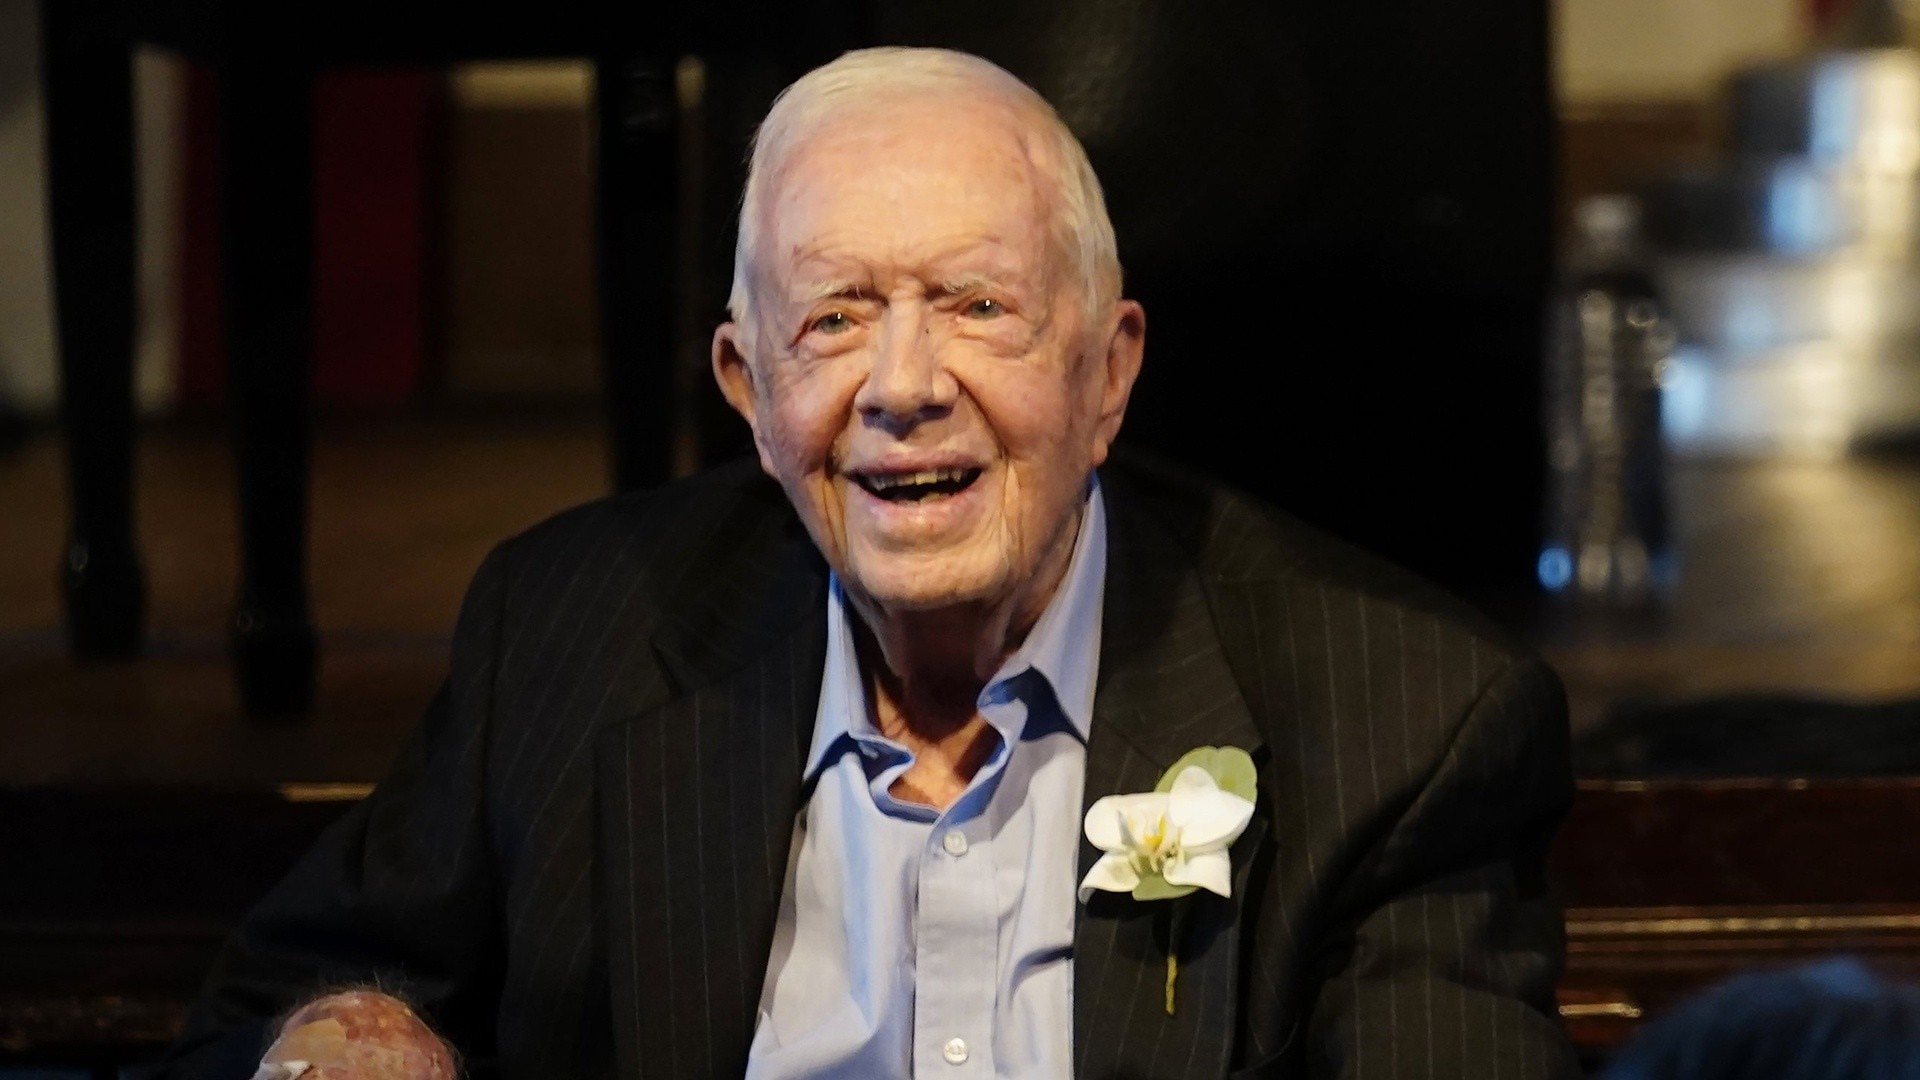 Watch TODAY Excerpt Former President Jimmy Carter celebrates his 98th